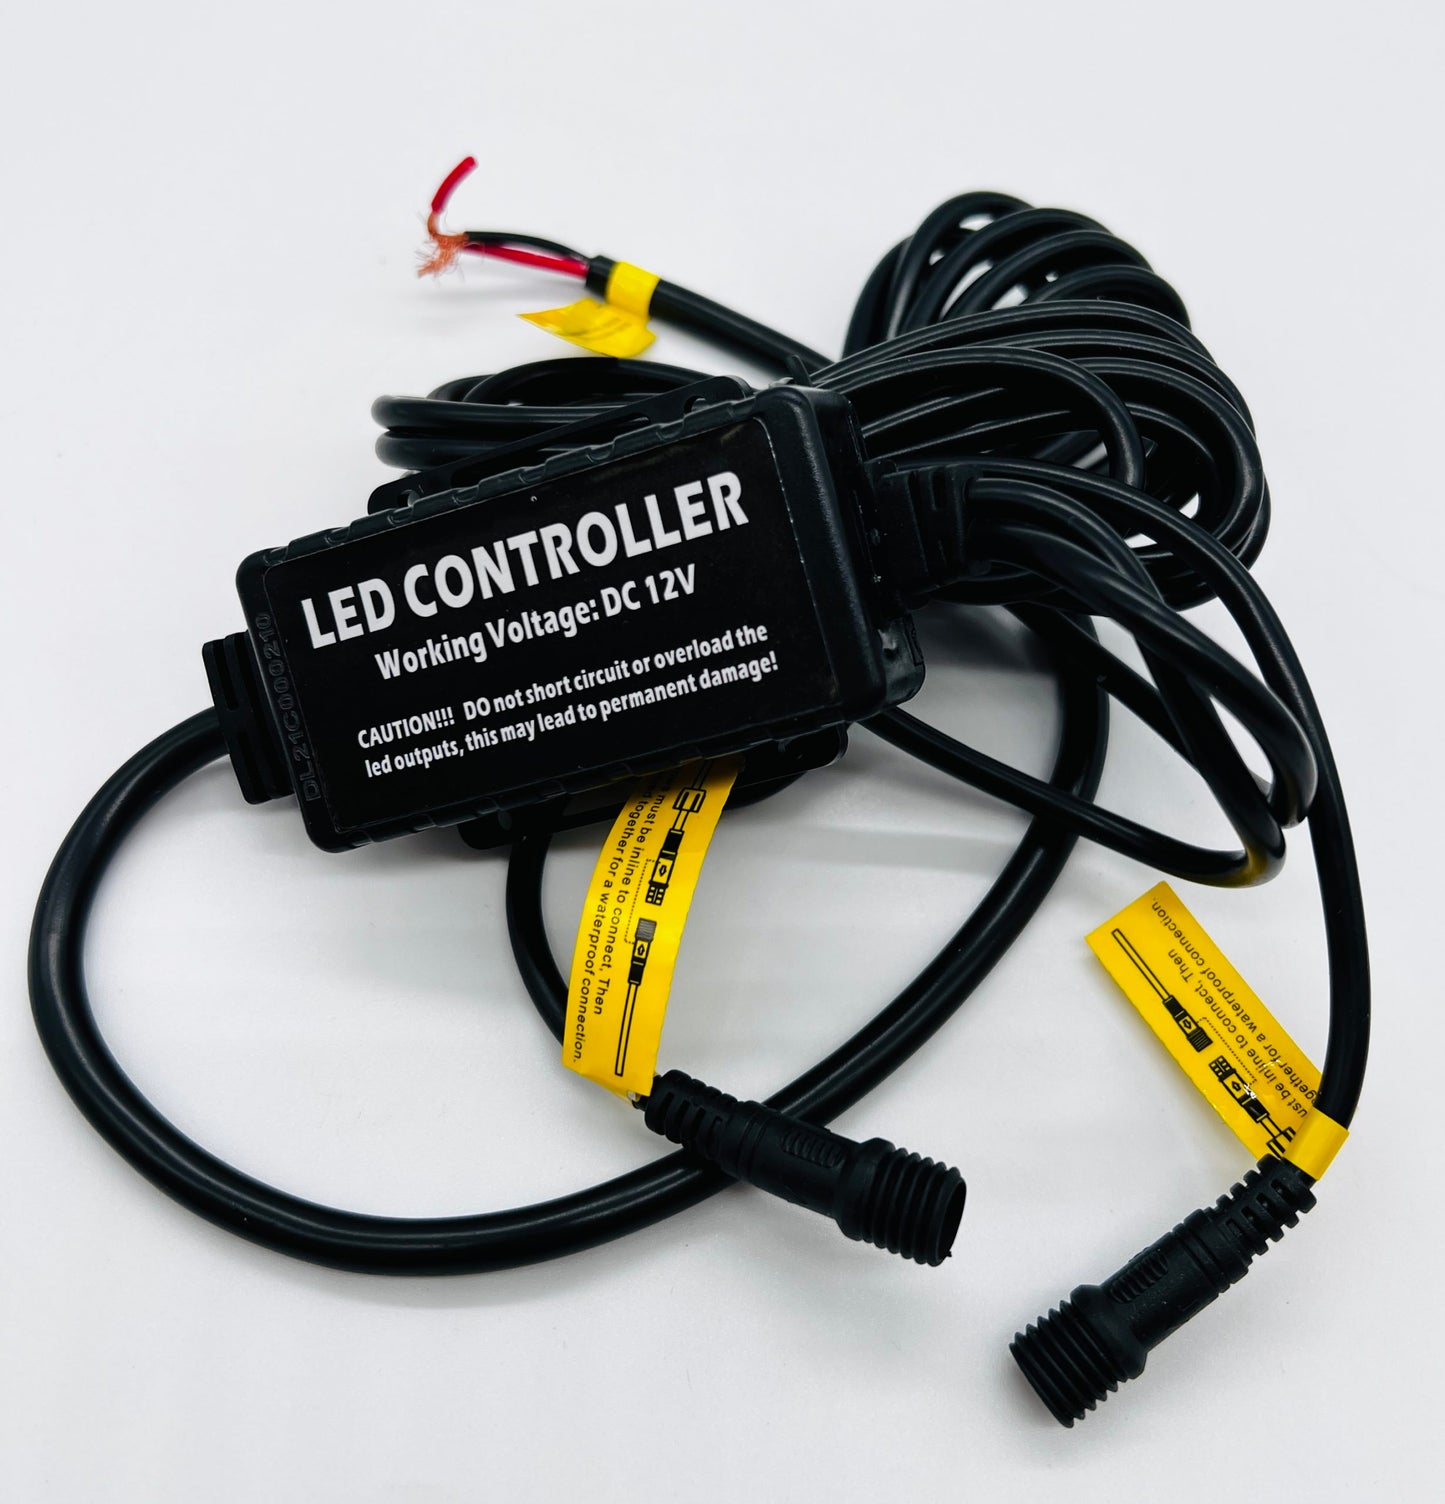 Code 4 LED Dual RGBW lighted whip controller with remote control